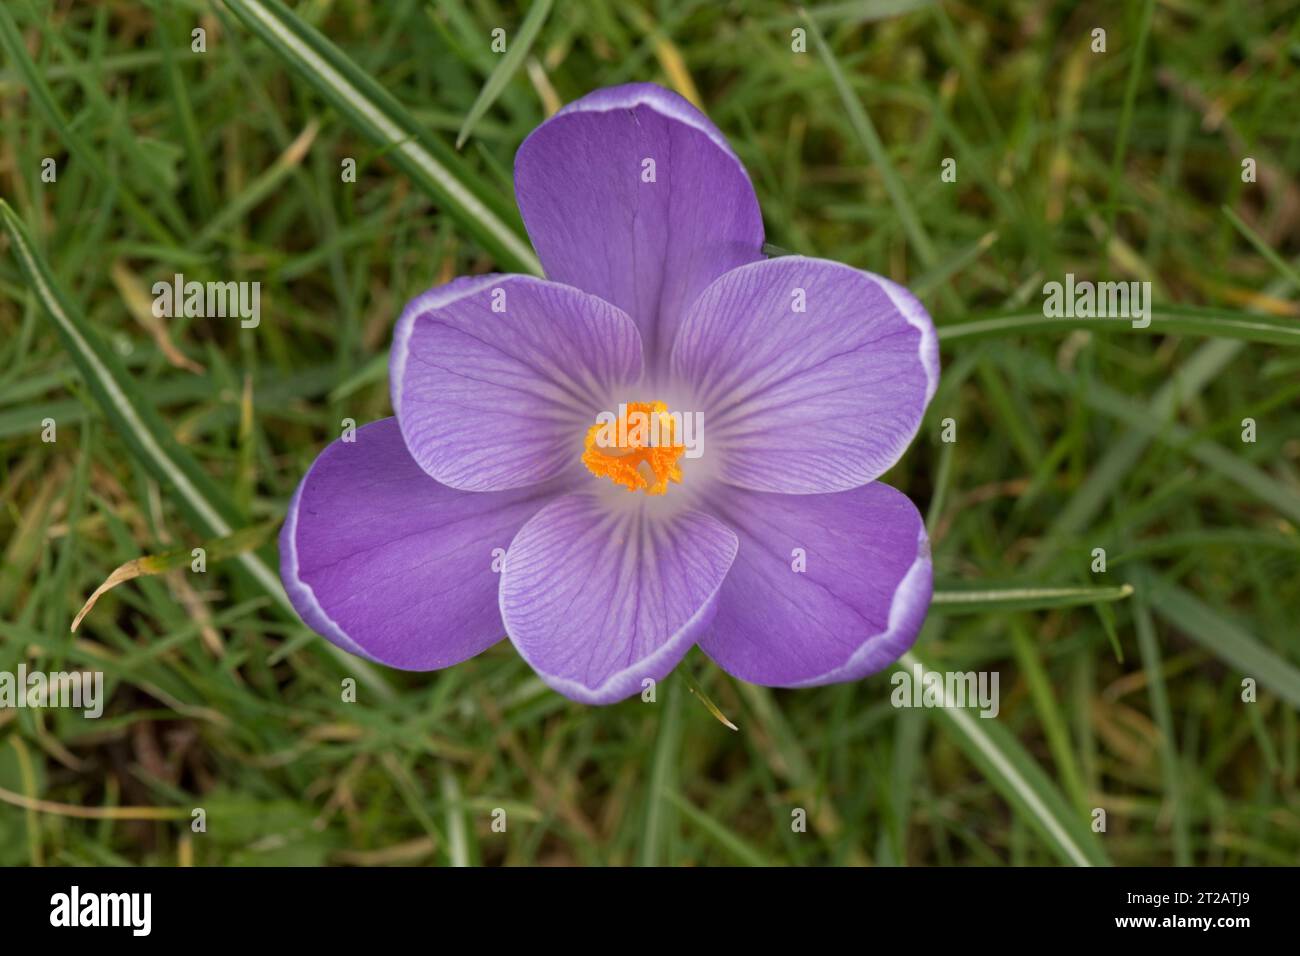 Purple crocus flower with contrasting orange anthers from a corm growing in a garden lawn, purple veining on the 2 whorls of tepals, Berkshire, March Stock Photo